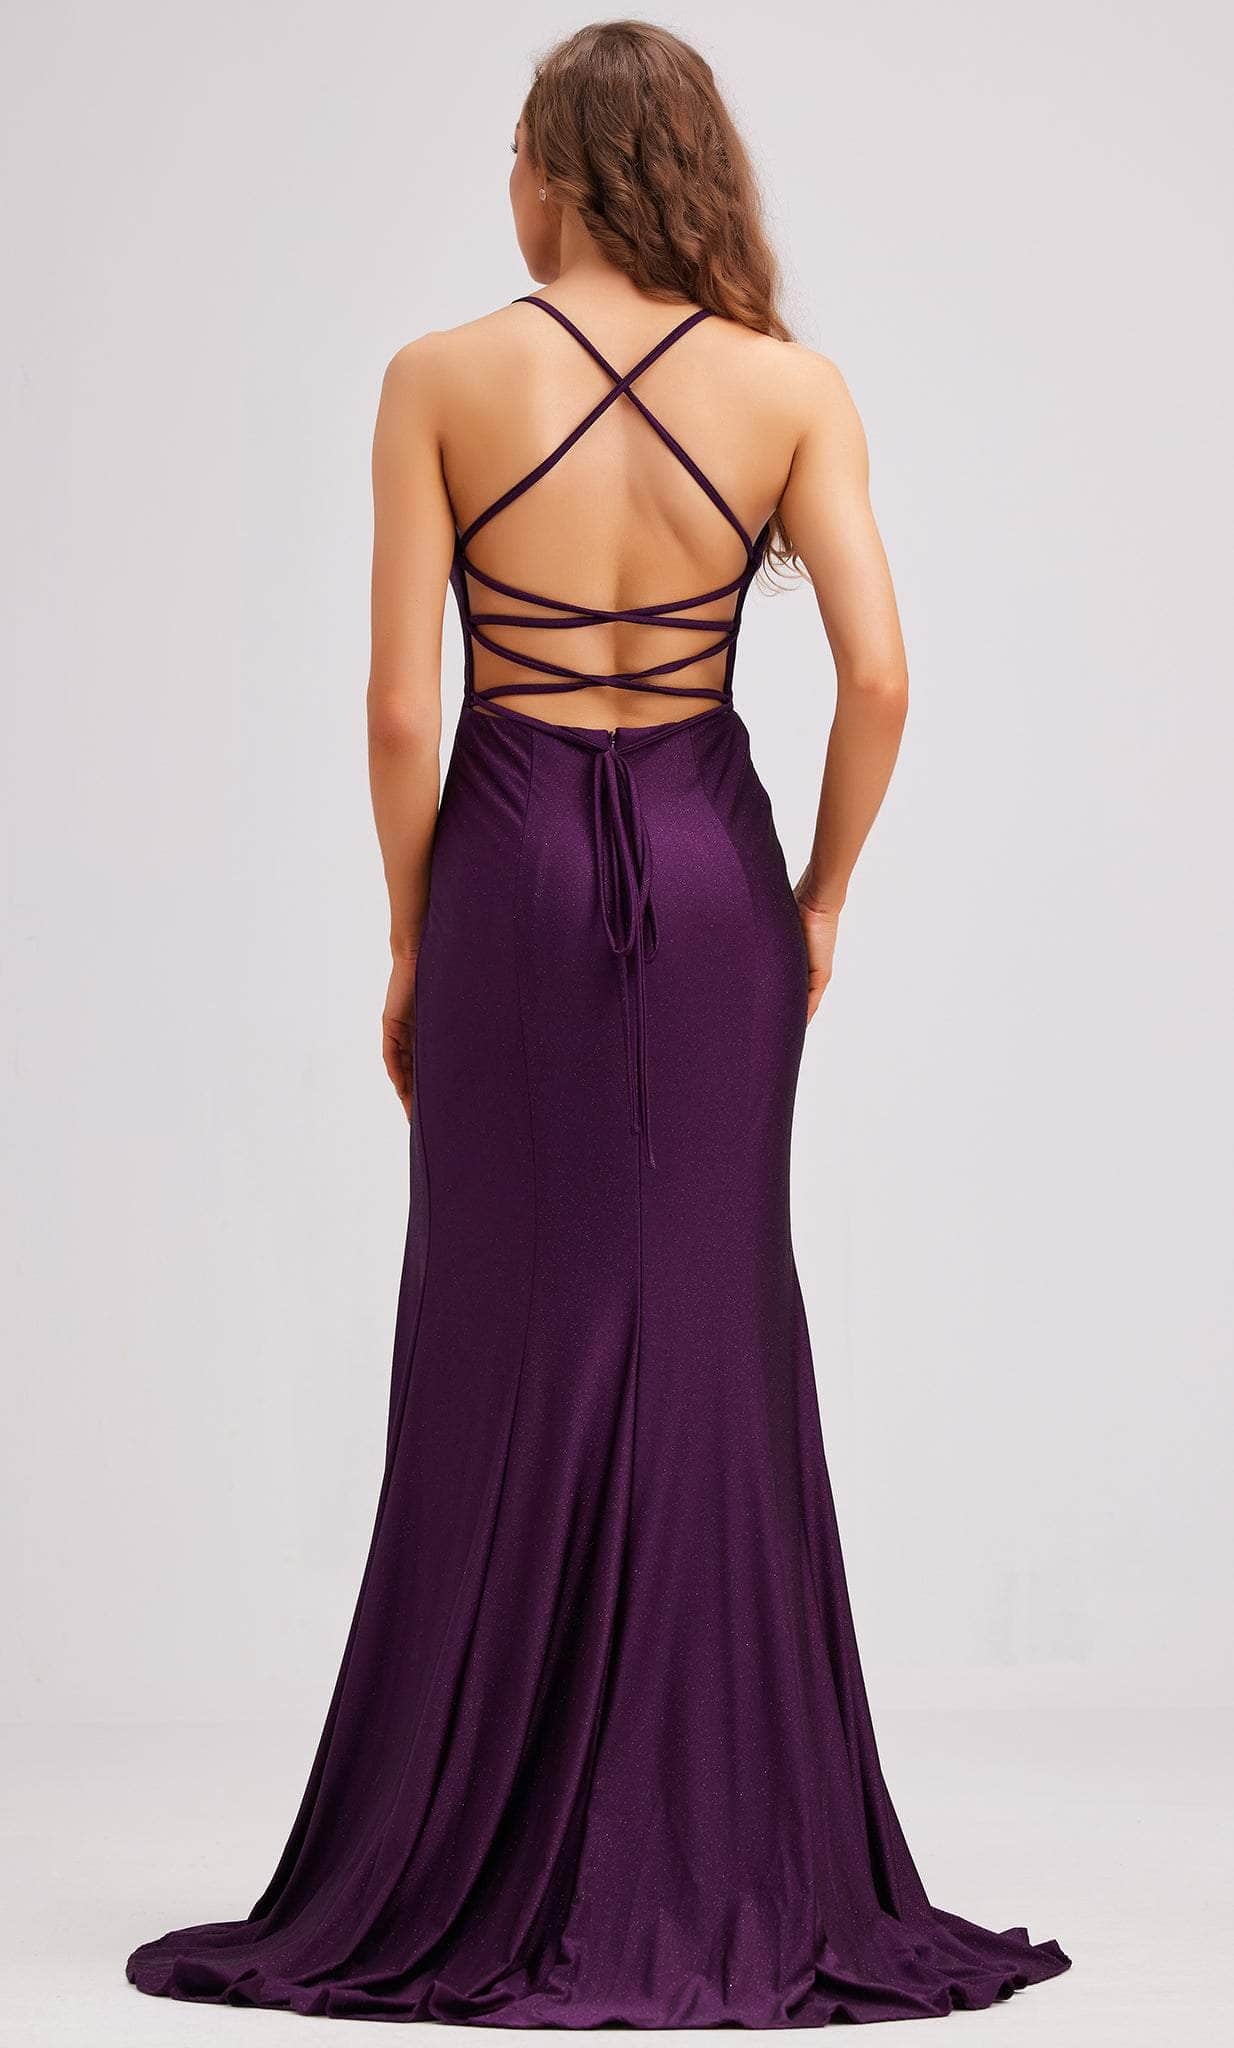 J'Adore Dresses J23005 - Lace Up Back Evening Dress with Slit Special Occasion Dress